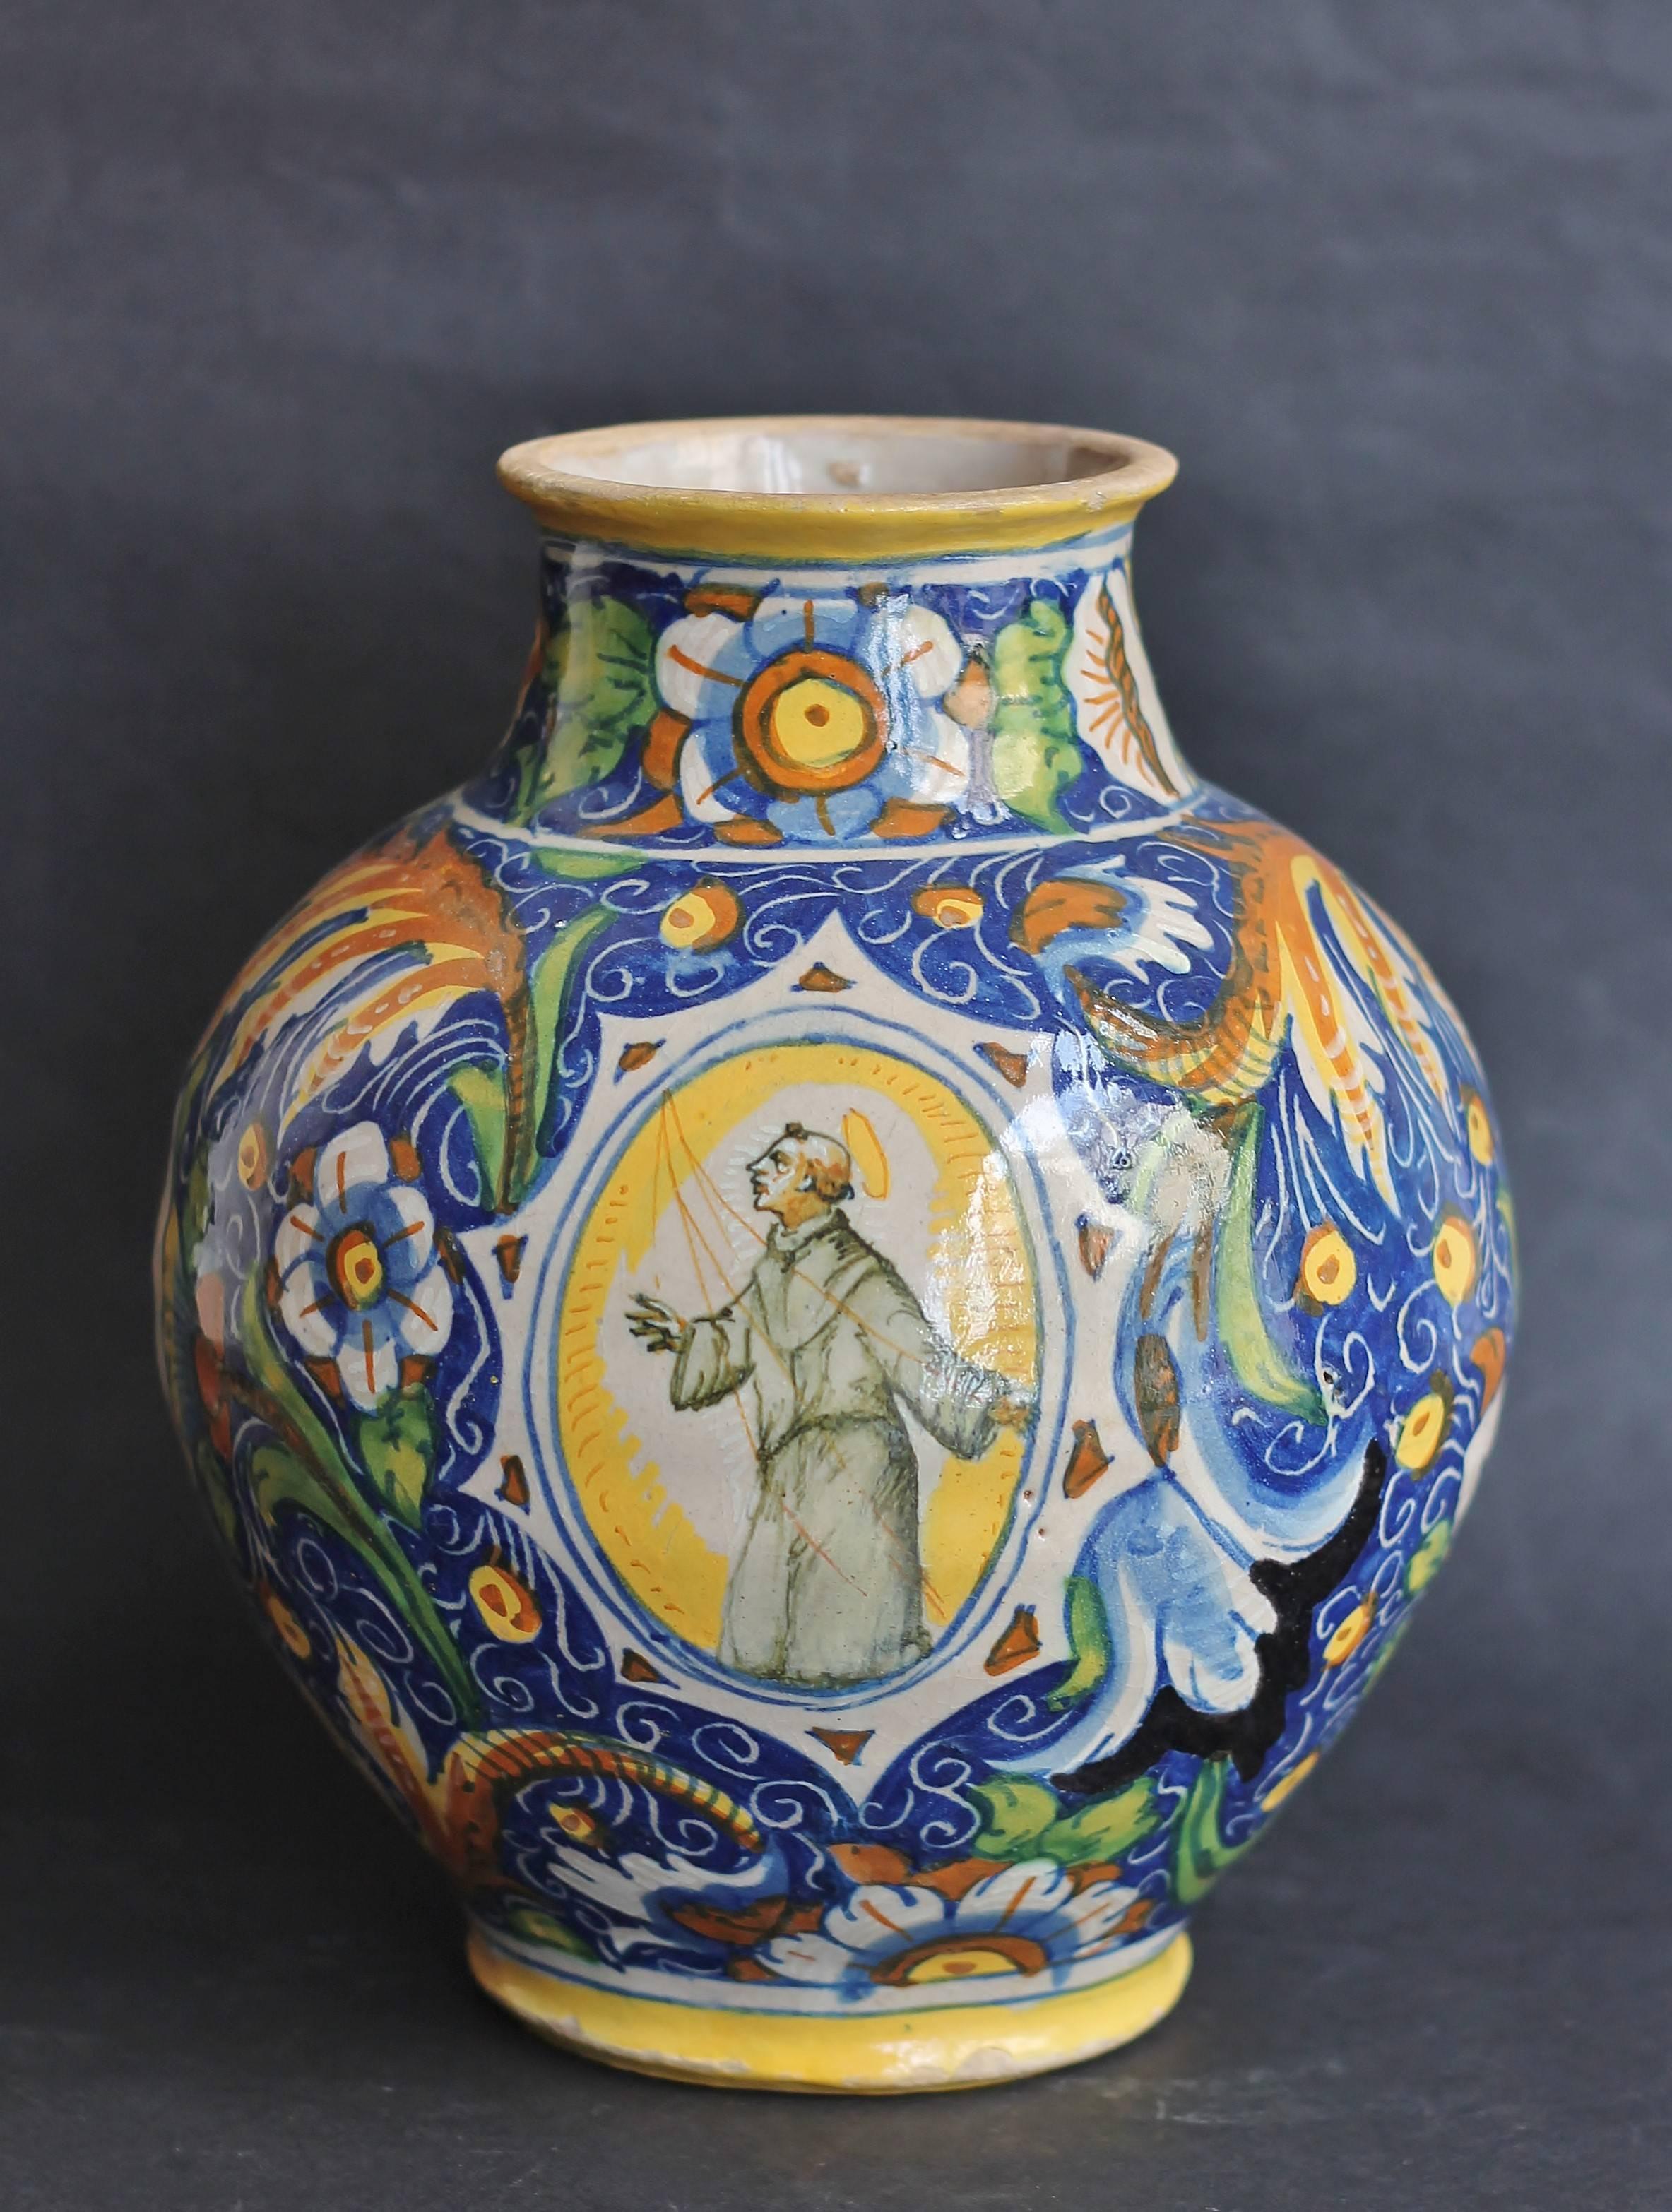 Ovoid vase in majolica with polychrome decoration the broad rinceaux one flowered on blue bottom and of an oval cartouche representing Saint François with the face and the hands turned skyward. It’s the perfect Christian. It’s the Saint the most